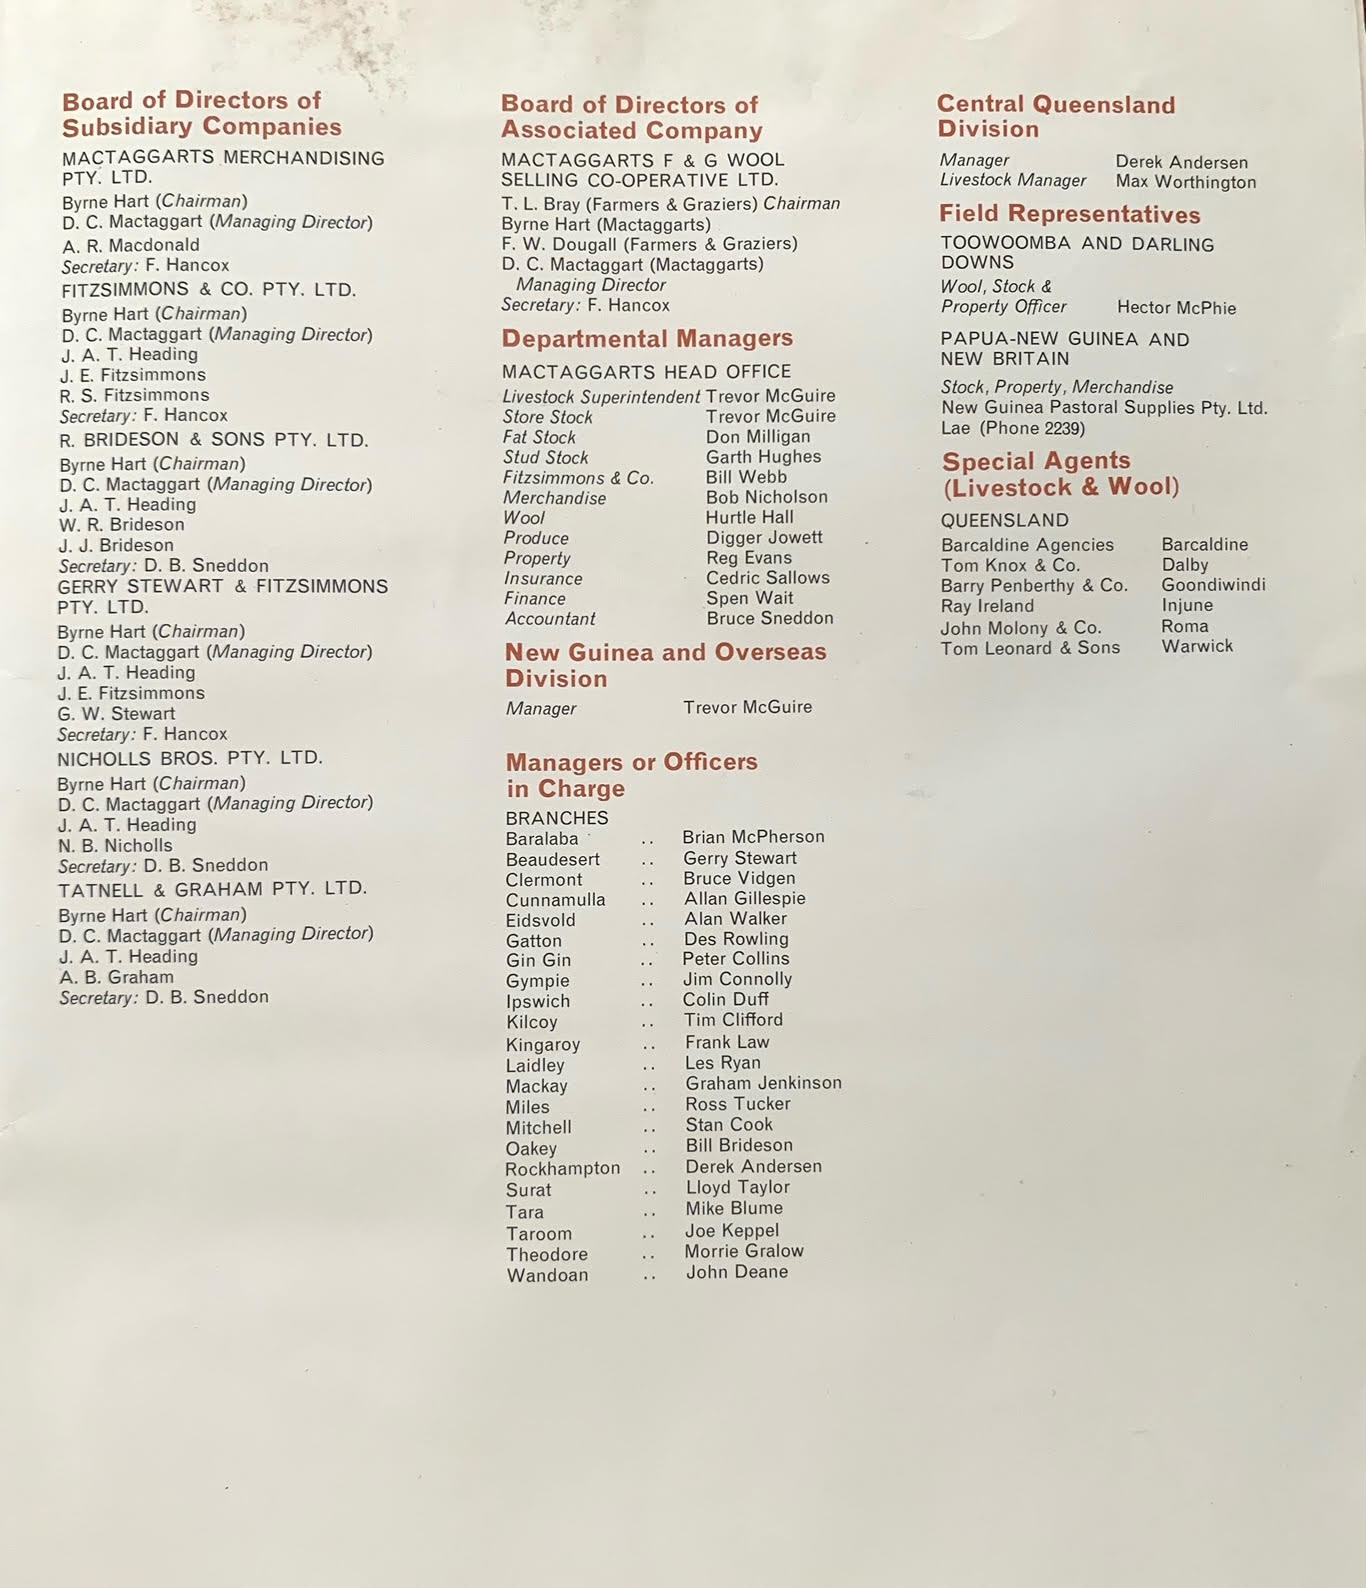 Mactaggarts 1969 annual report - list of branches and managers